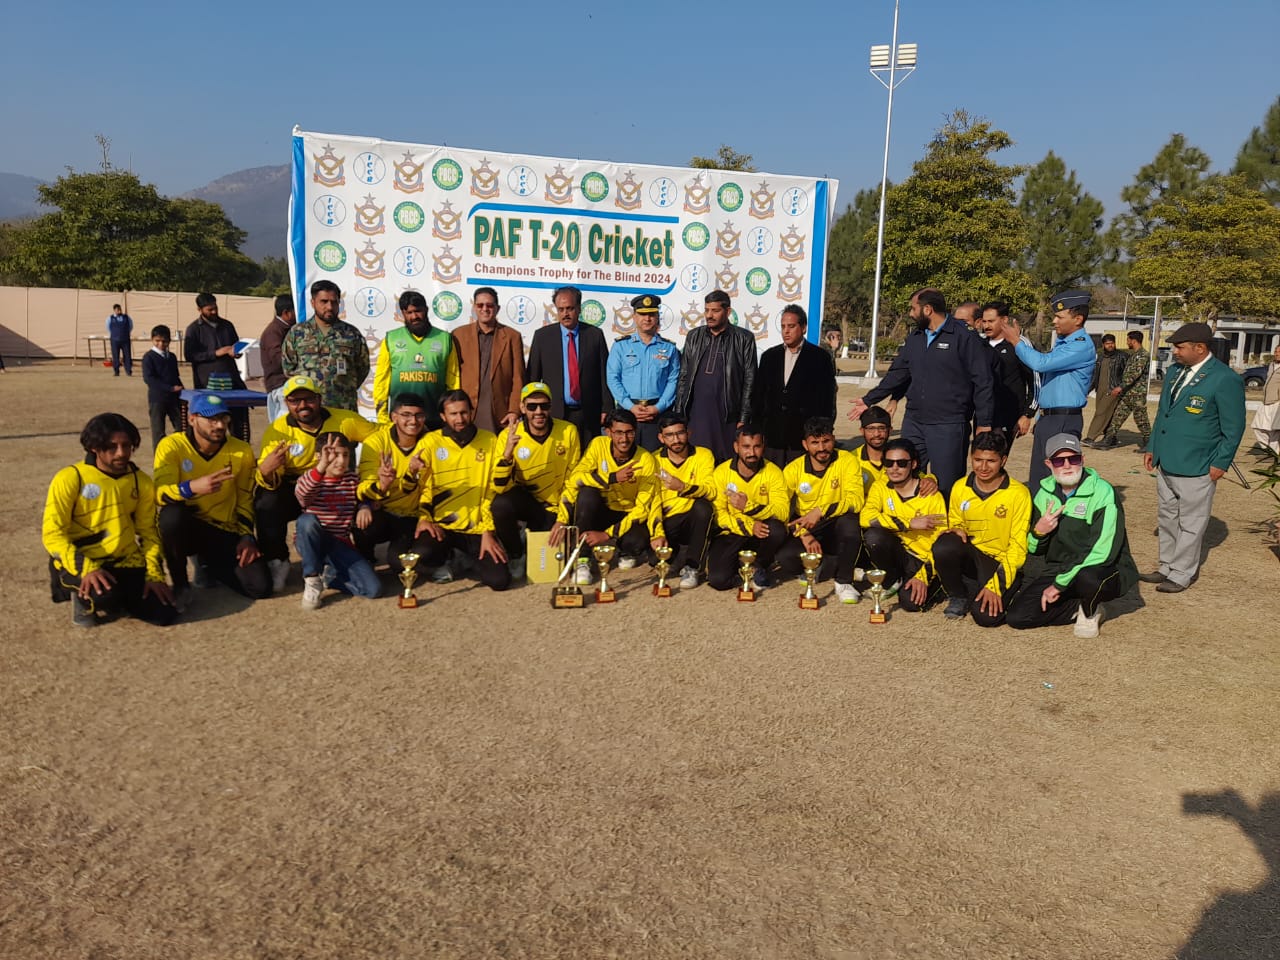 AJK beats Islamabad to annex PAF T20 Cricket C'ships Trophy